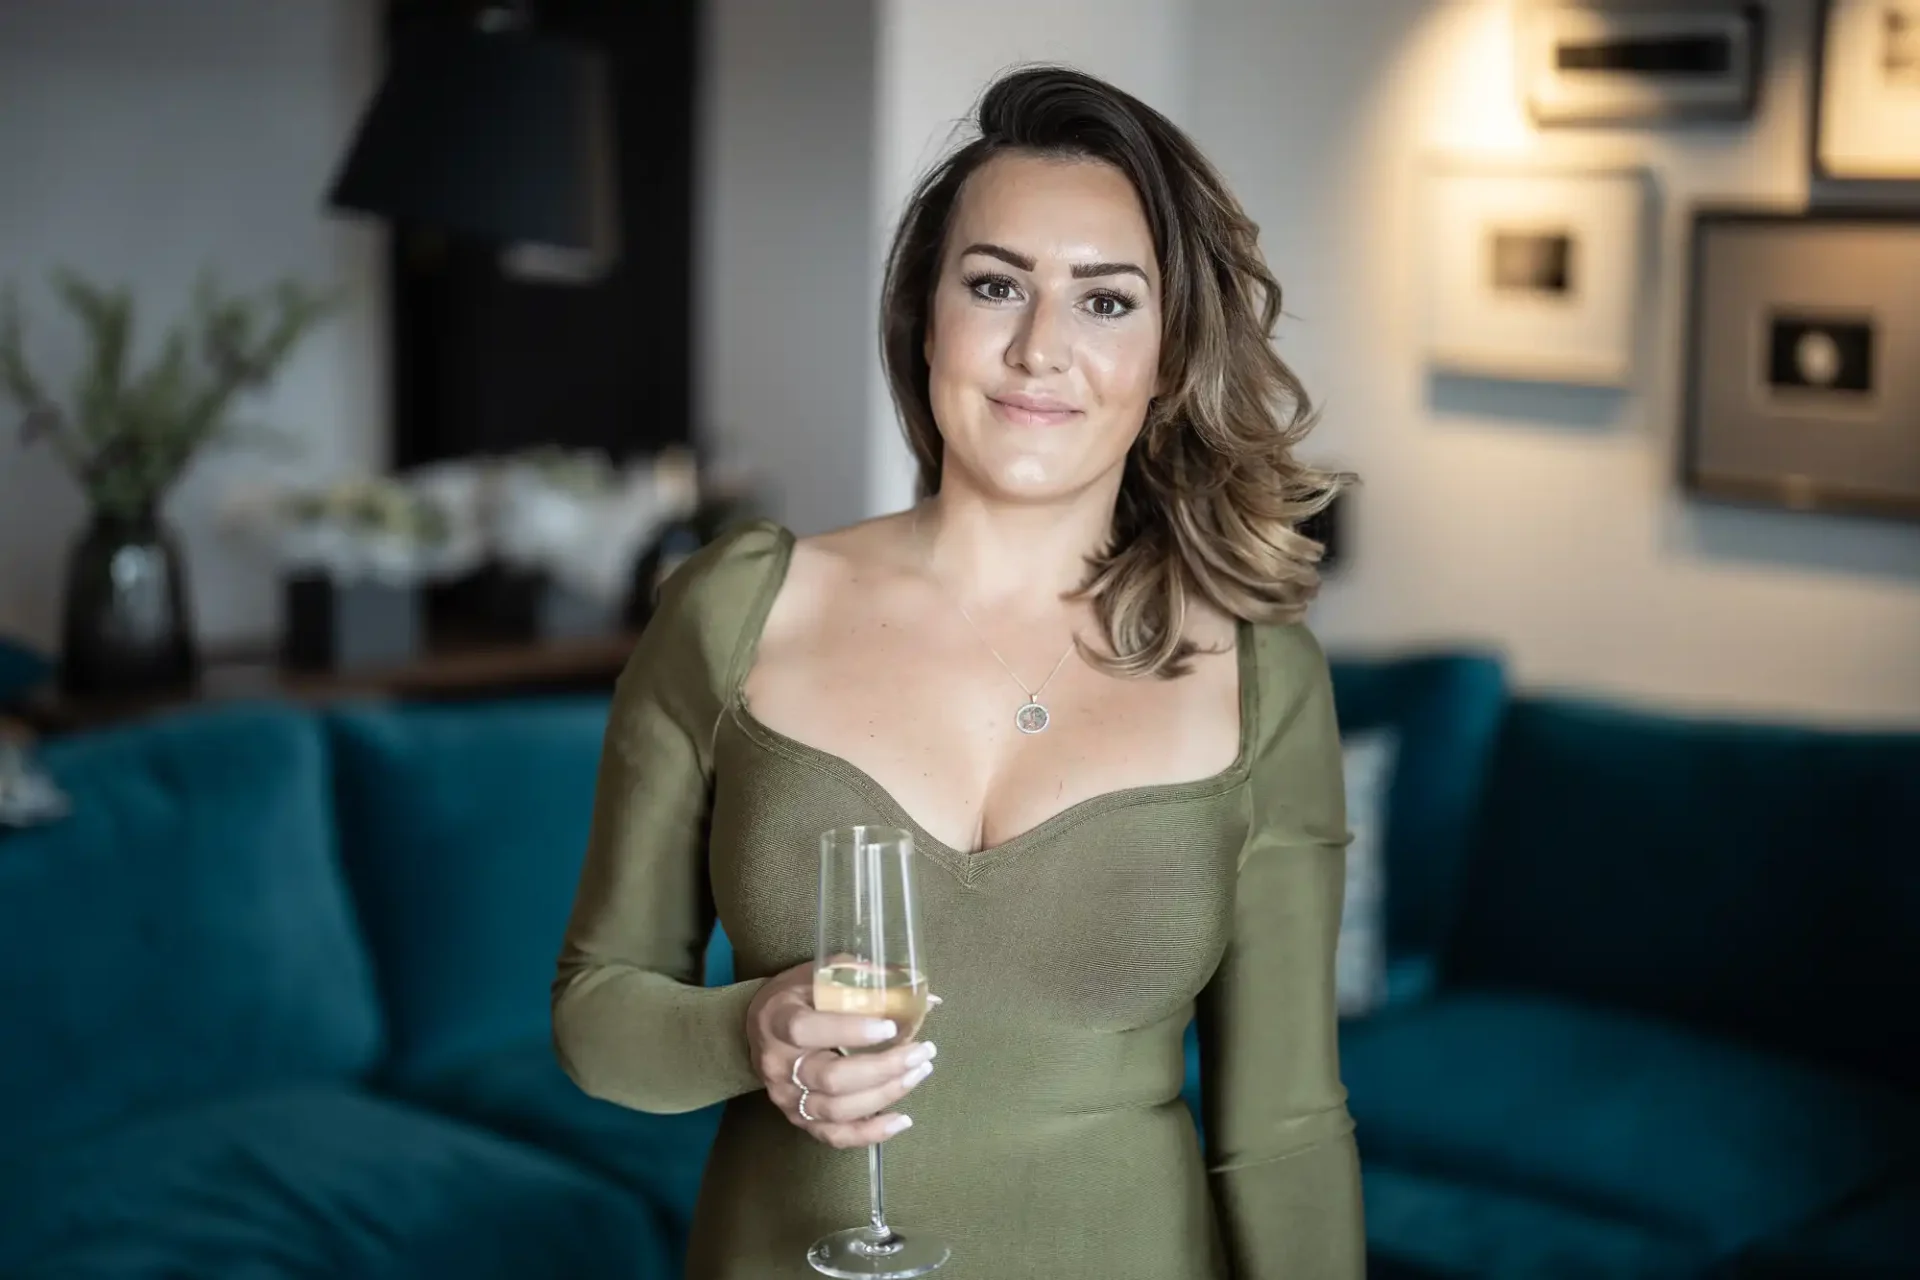 A woman in a green dress smiles while holding a glass of champagne, standing in a stylish living room.